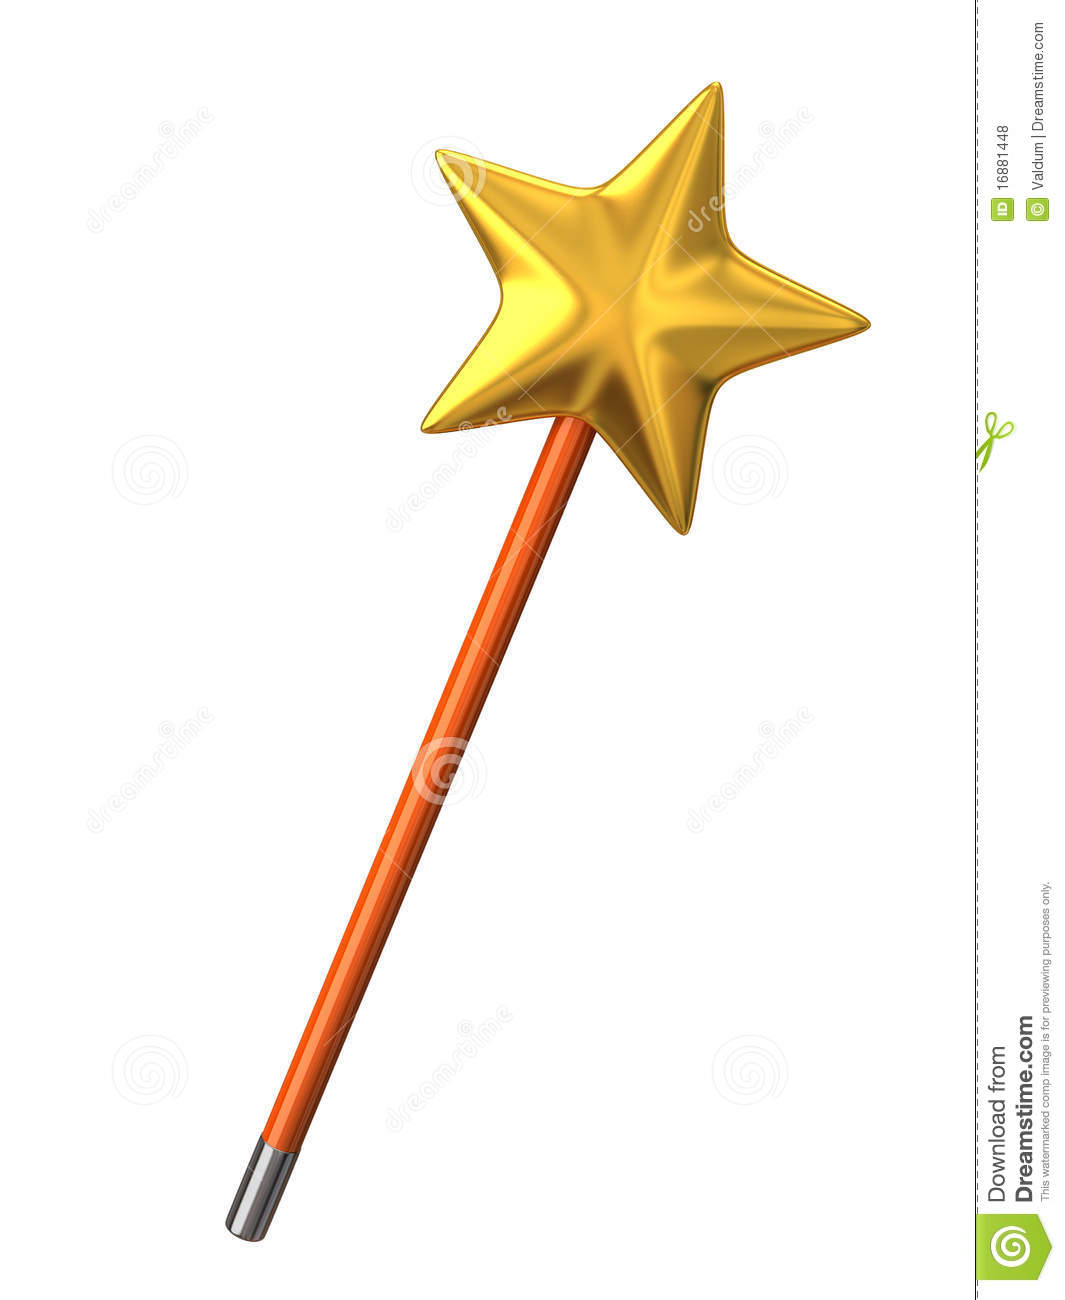 Wand Http   Www Dreamstime Com Royalty Free Stock Photos Magic Wand